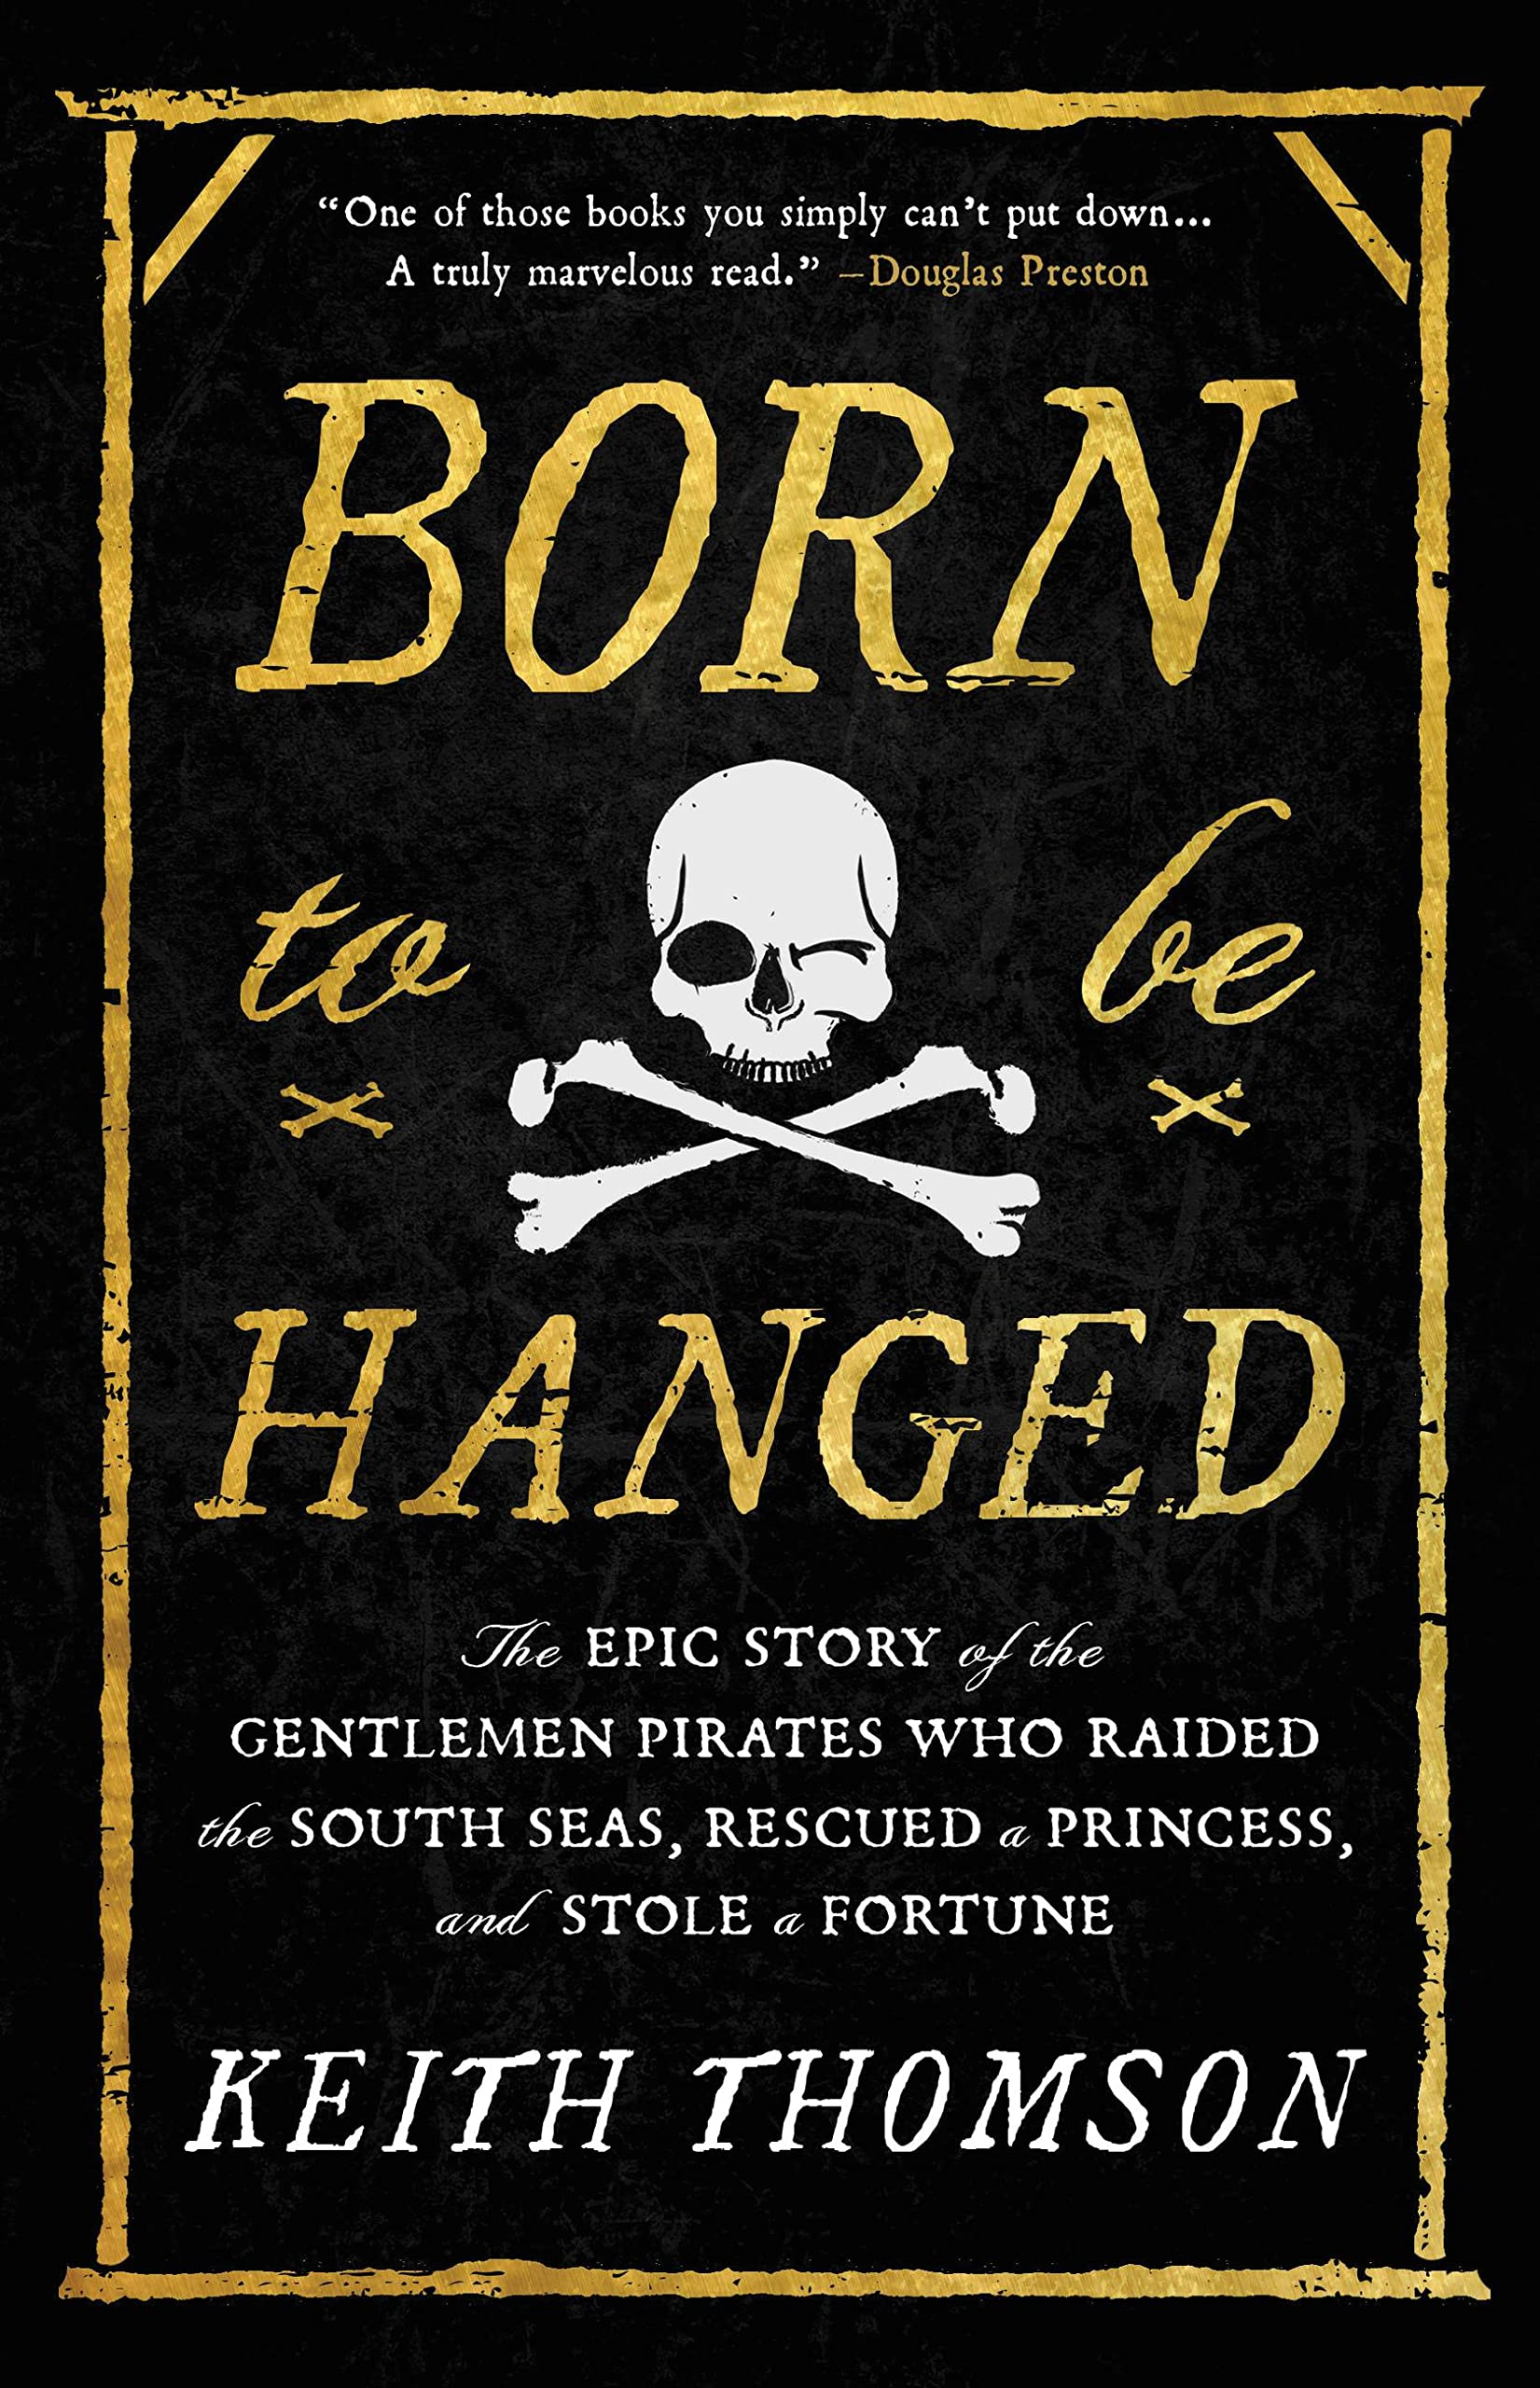 Born to Be Hanged: The Epic Story of the Gentlemen Pirates Who Raided the South Seas, Rescued a Princess, and Stole 